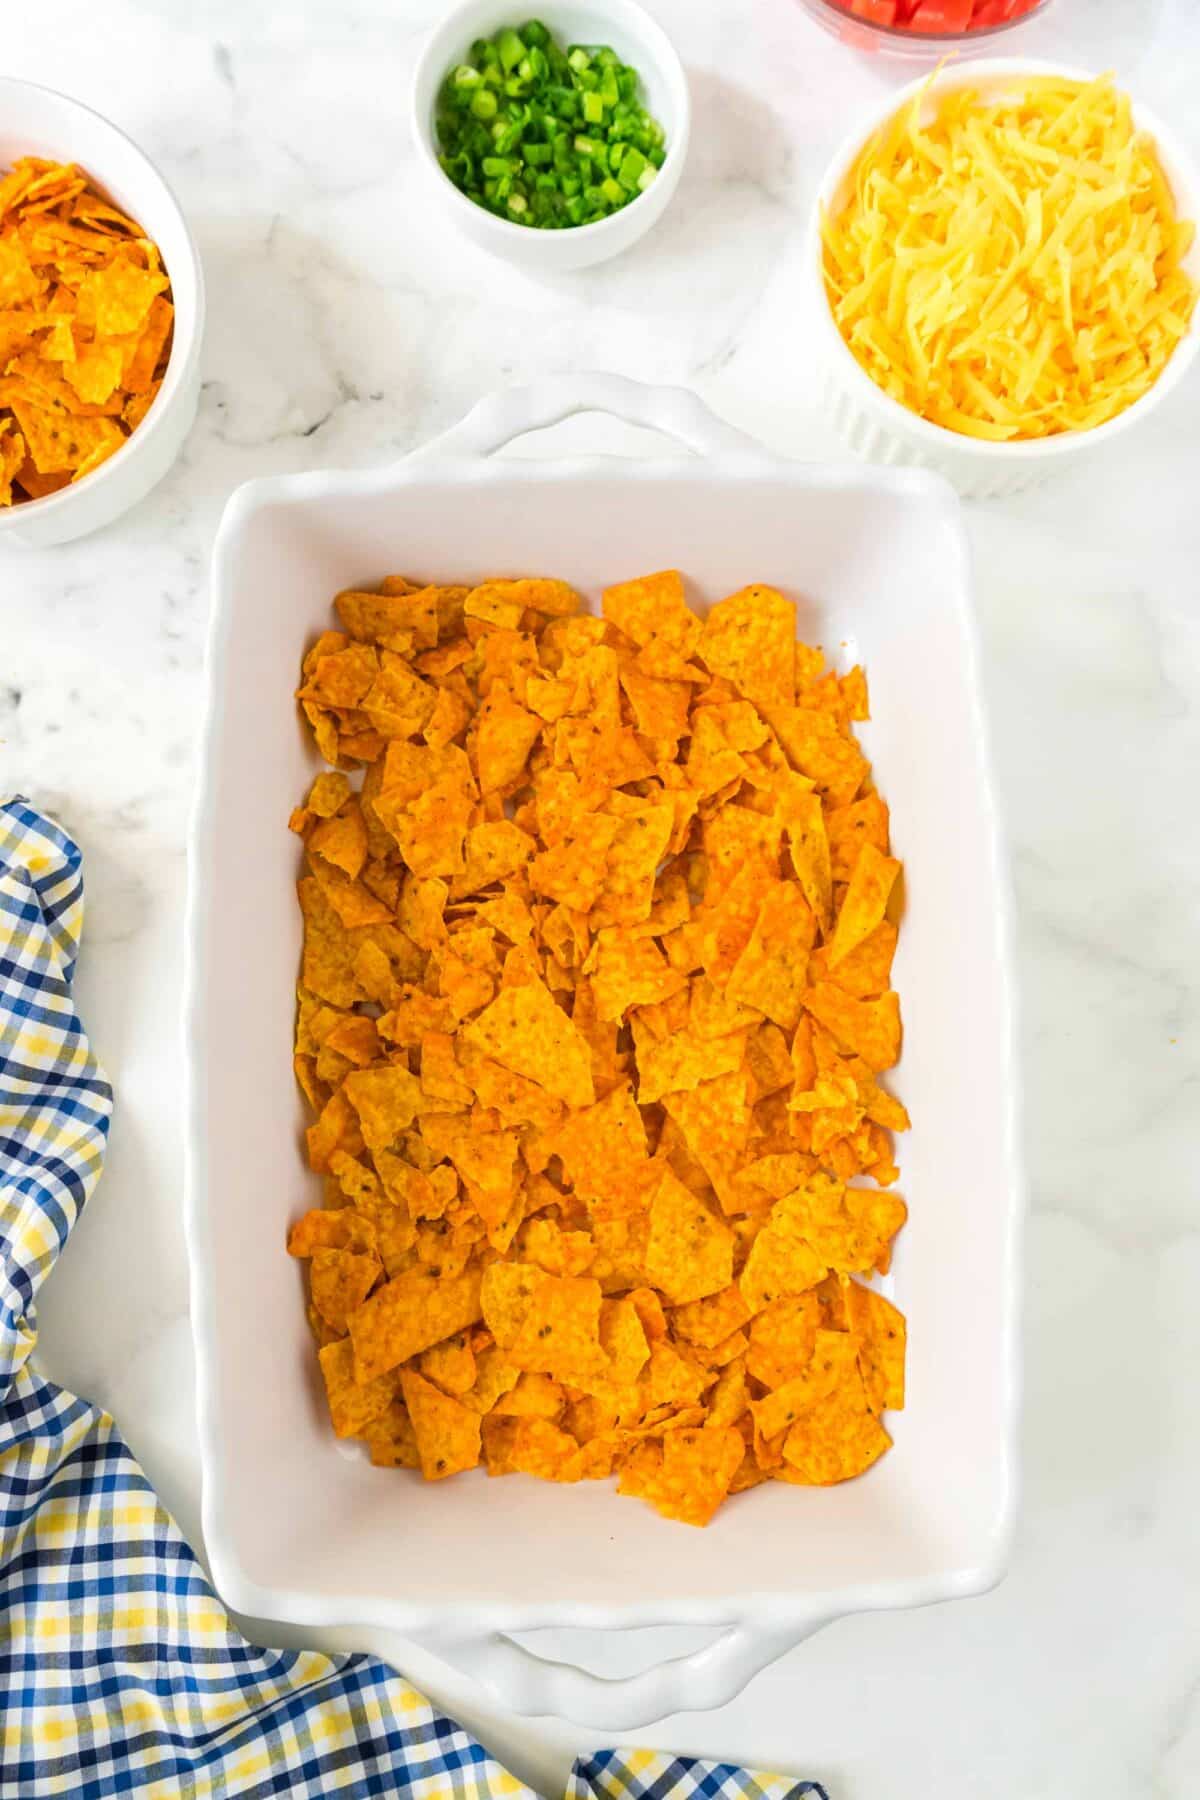 Crushed Doritos chips in a casserole dish.